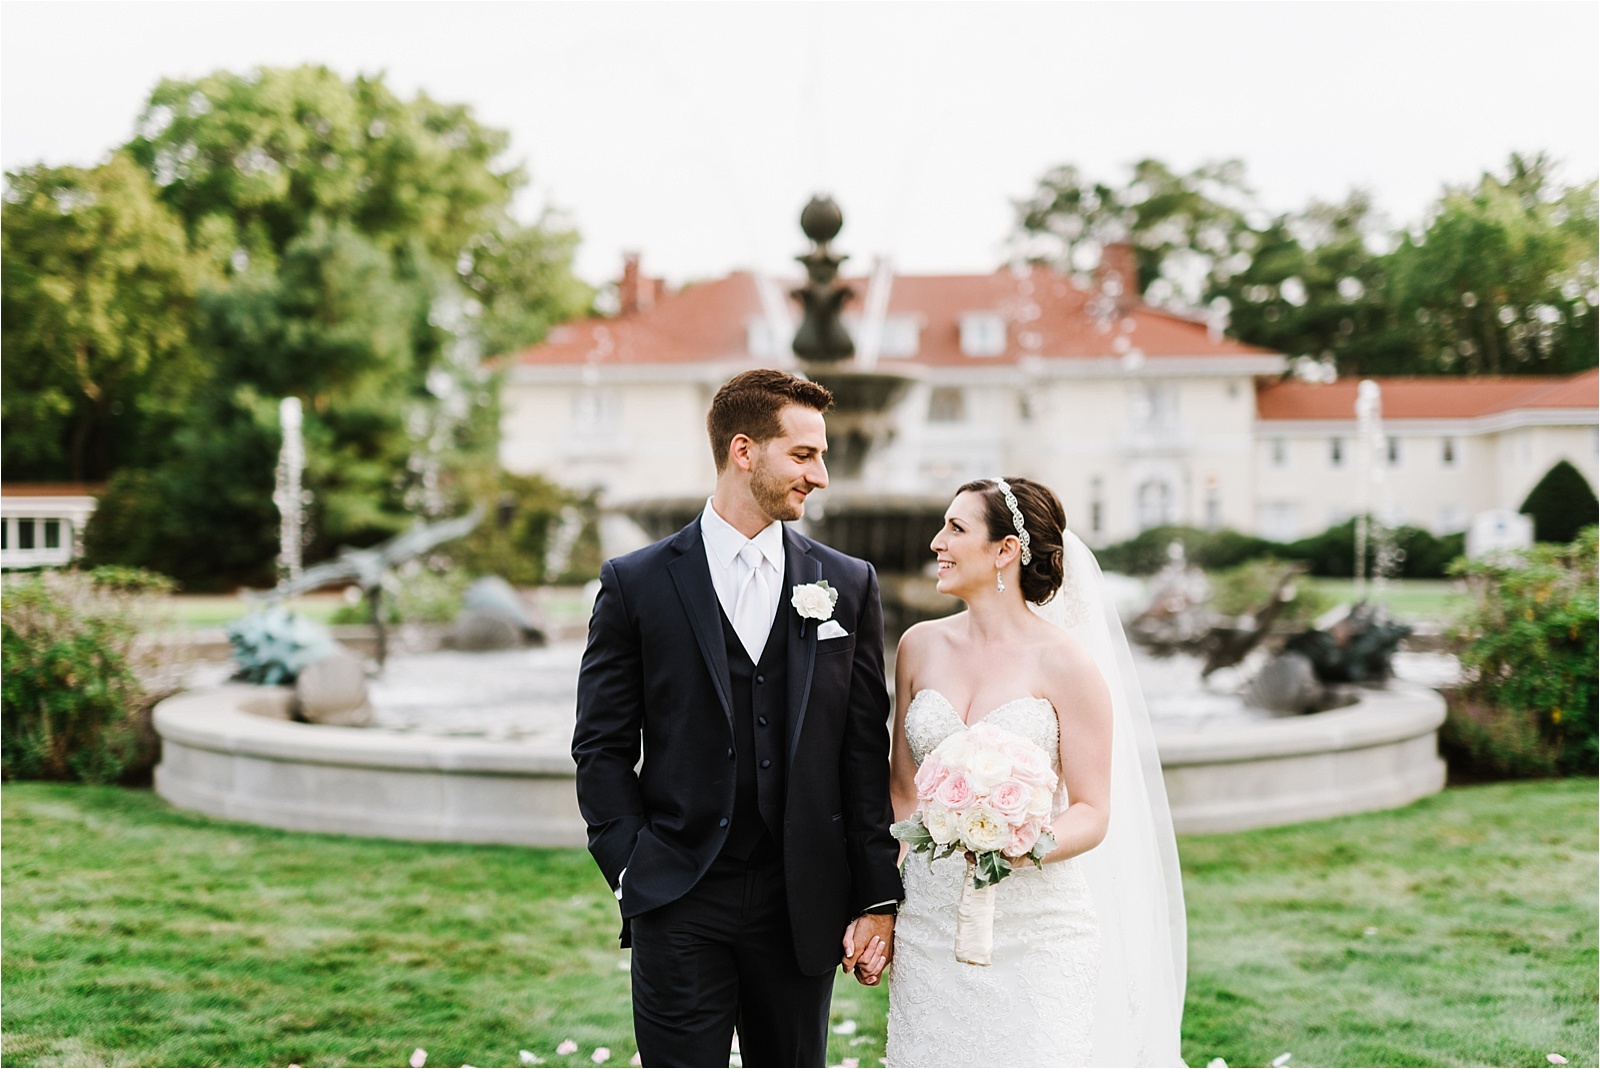 Classic & Romantic Wedding at Tupper Manor at Endicott College in Beverly, MA by Boston Wedding Photographer Annmarie Swift